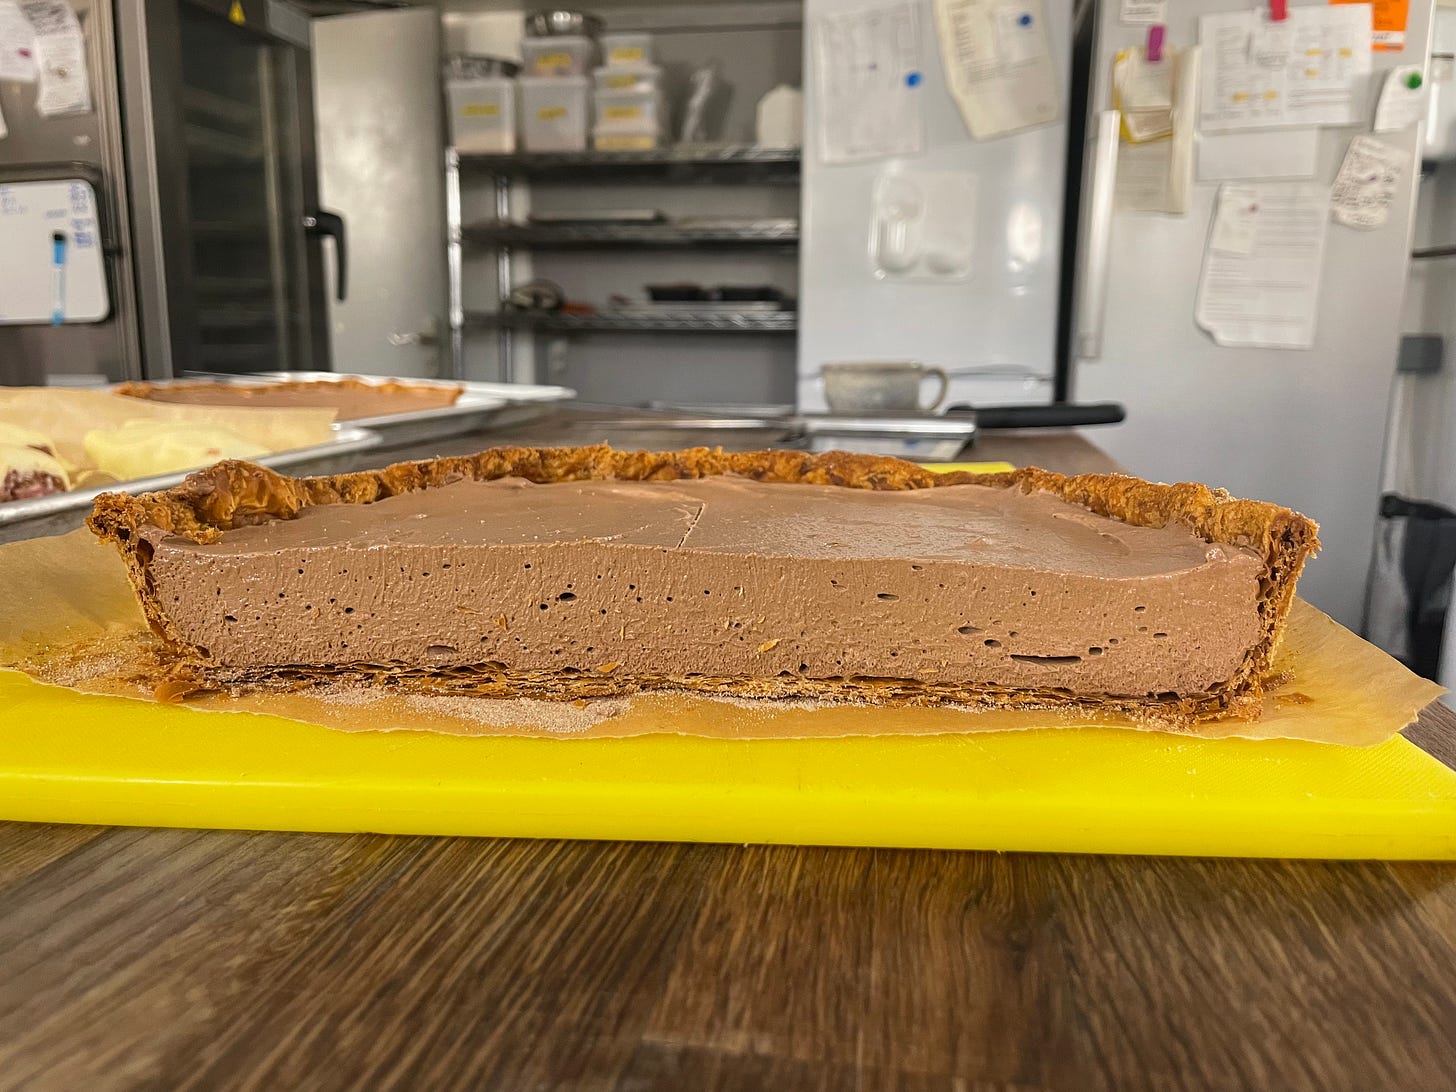 A cross-section of the champurrado pie, showing off the thick layer of set chocolate custard and the crisp brown crust. The pie is on a yellow chopping board in a professional kitchen